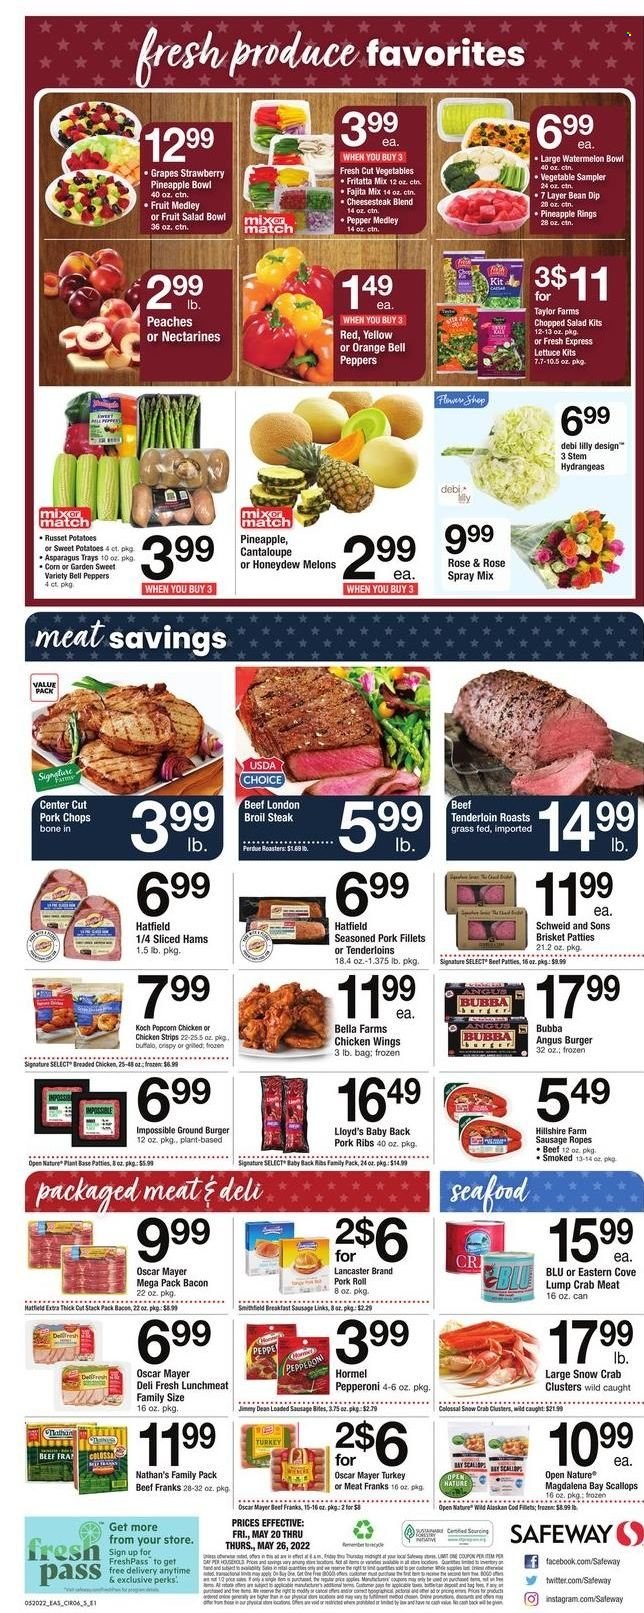 thumbnail - Safeway Flyer - 05/20/2022 - 05/26/2022 - Sales products - pie, asparagus, bell peppers, Bella, cantaloupe, russet potatoes, sweet potato, potatoes, peppers, chopped salad, grapes, watermelon, honeydew, pineapple, oranges, chicken wings, Perdue®, steak, hamburger, pork chops, pork meat, pork ribs, pork back ribs, cod, crab meat, scallops, crab, fried chicken, Jimmy Dean, Hormel, fajita mix, bacon, Hillshire Farm, Oscar Mayer, pepperoni, lunch meat, dip, strips, chicken strips, popcorn, fruit salad, wine, rosé wine, salad bowl, rose, nectarines, melons, peaches. Page 8.